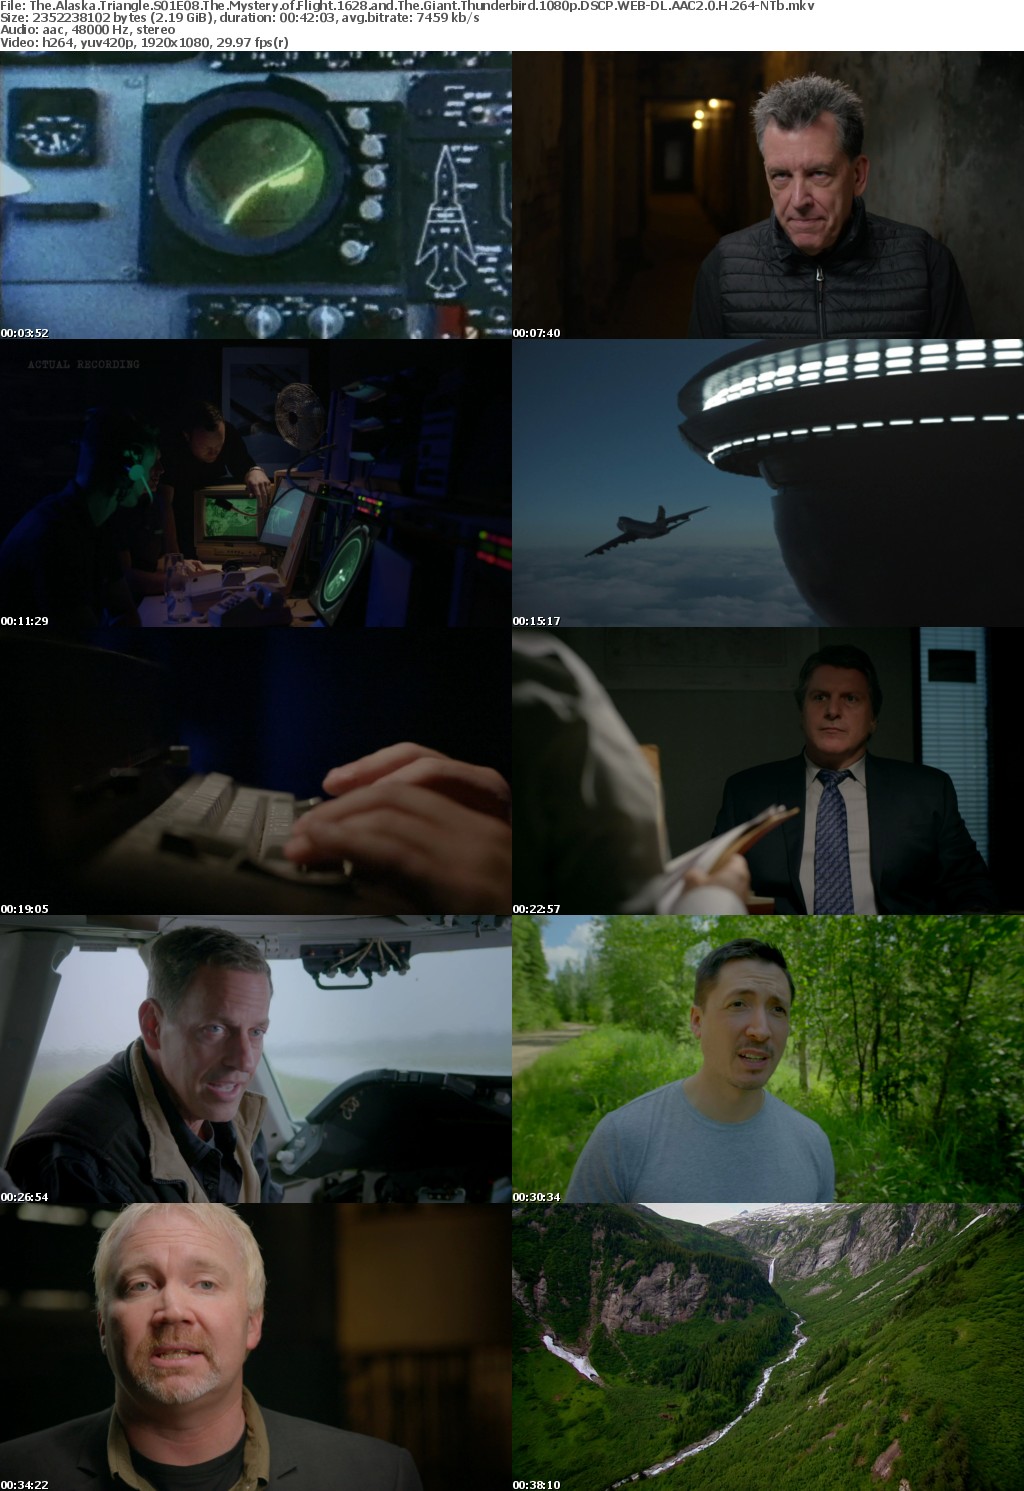 The Alaska Triangle S01E08 The Mystery of Flight 1628 and The Giant Thunderbird 1080p DSCP WEB-DL AAC2 0 H 264-NTb